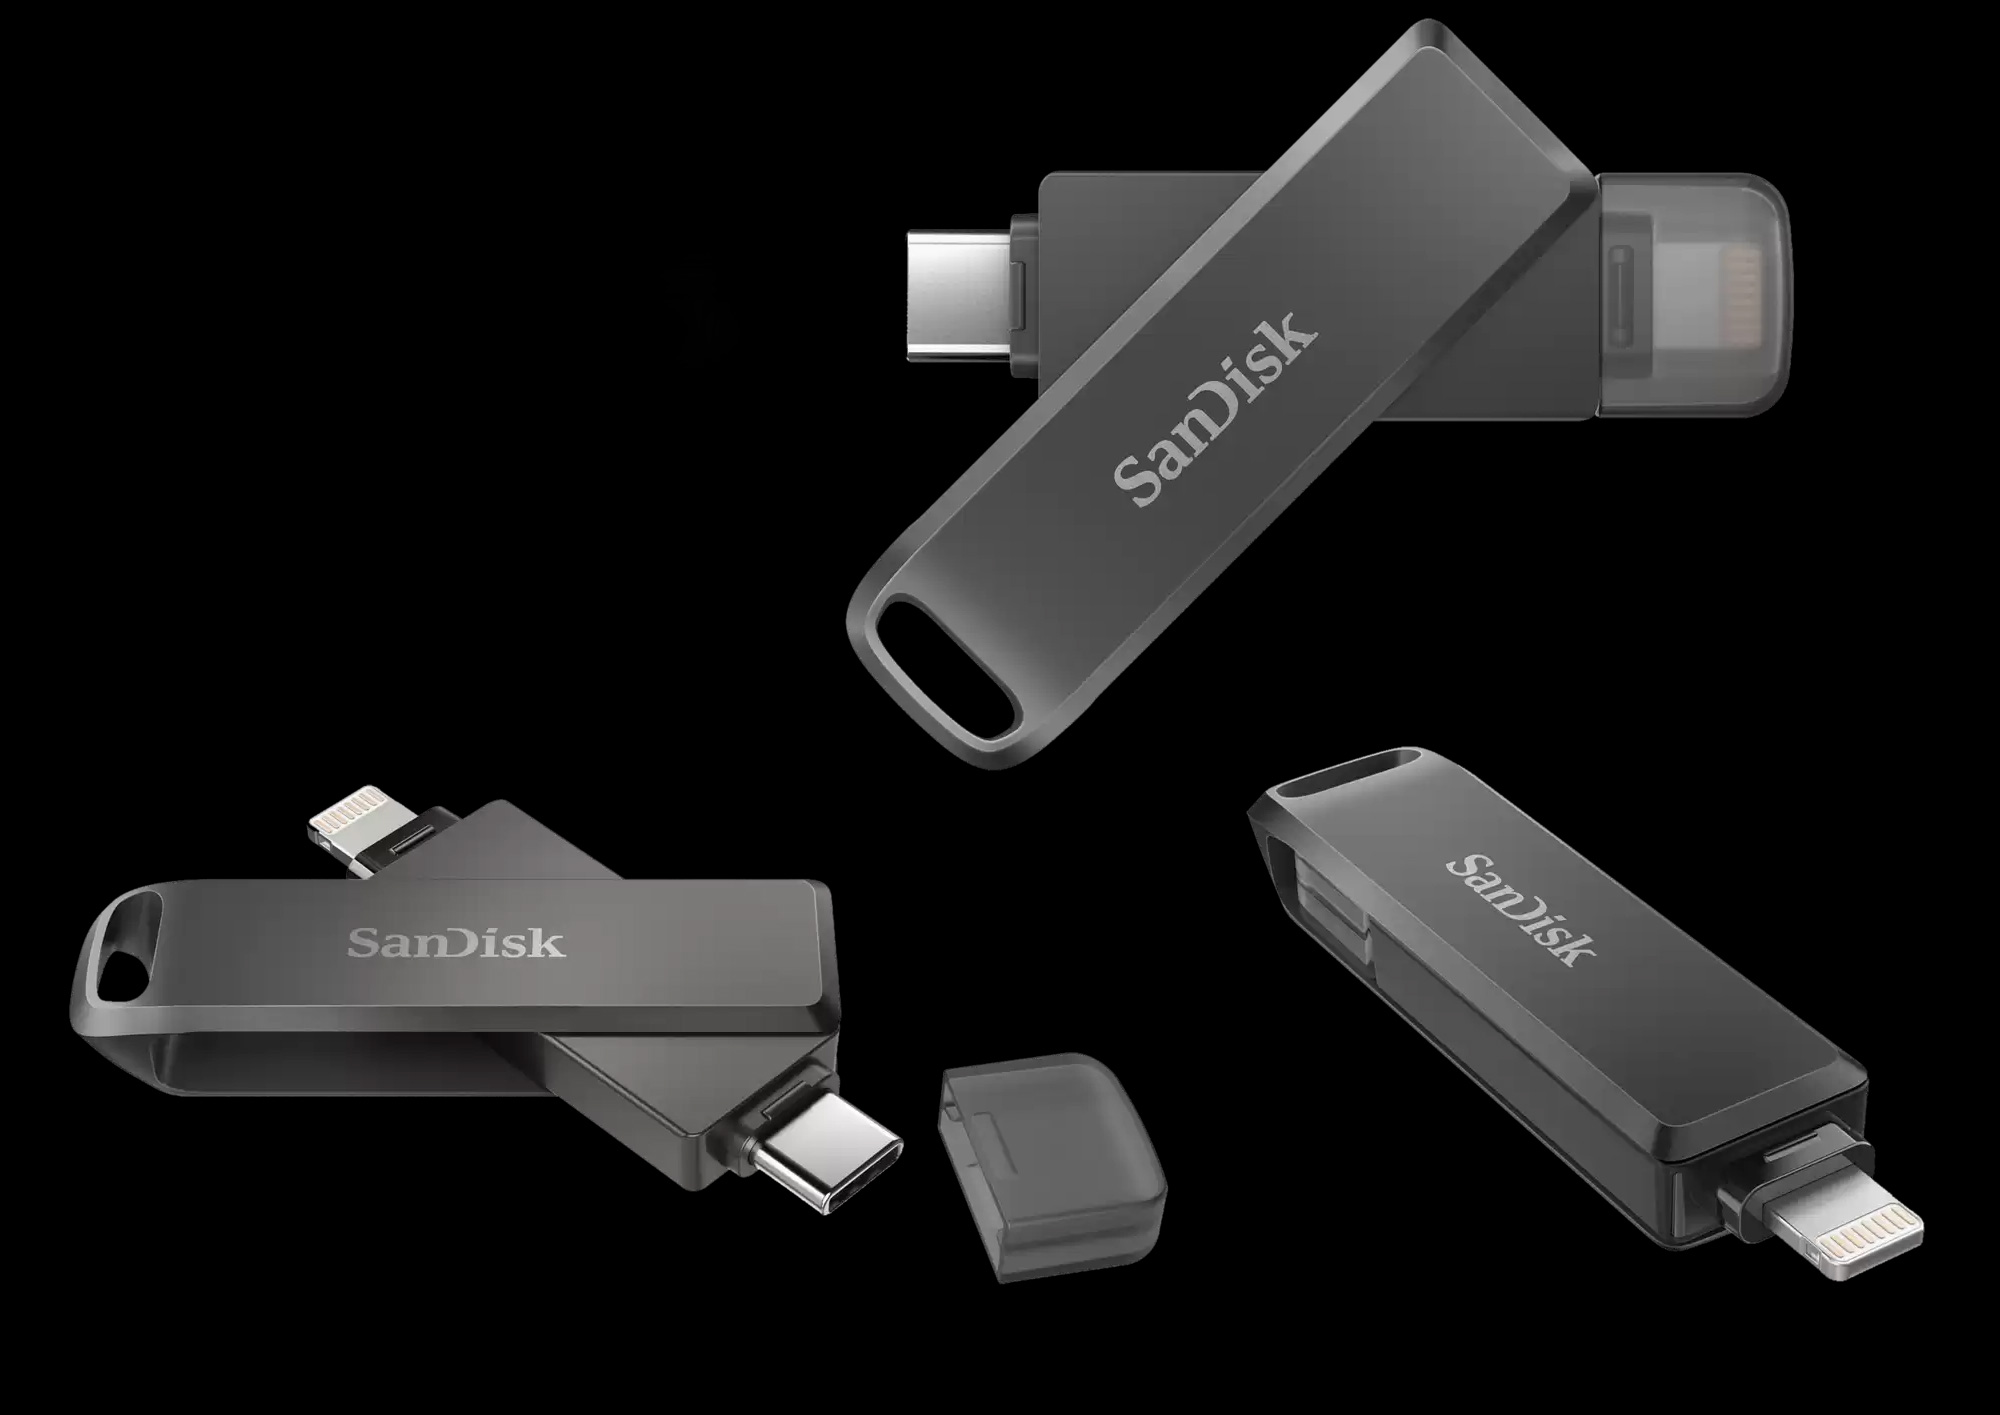 SanDisk's USB Type-C drive for iPhone and Android by Jose Antunes